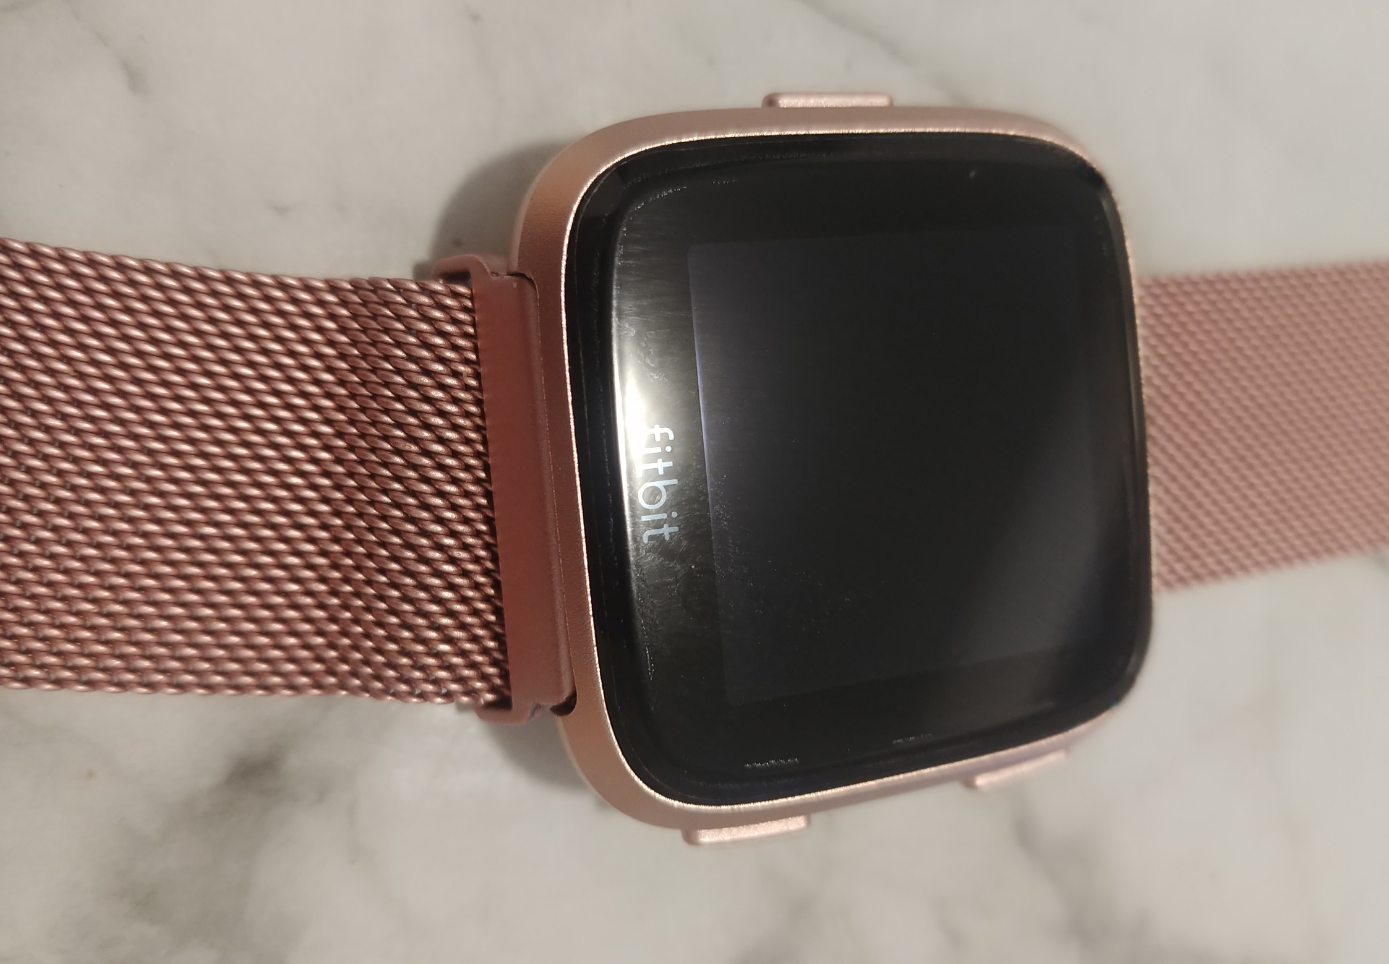 rose colored fitbit